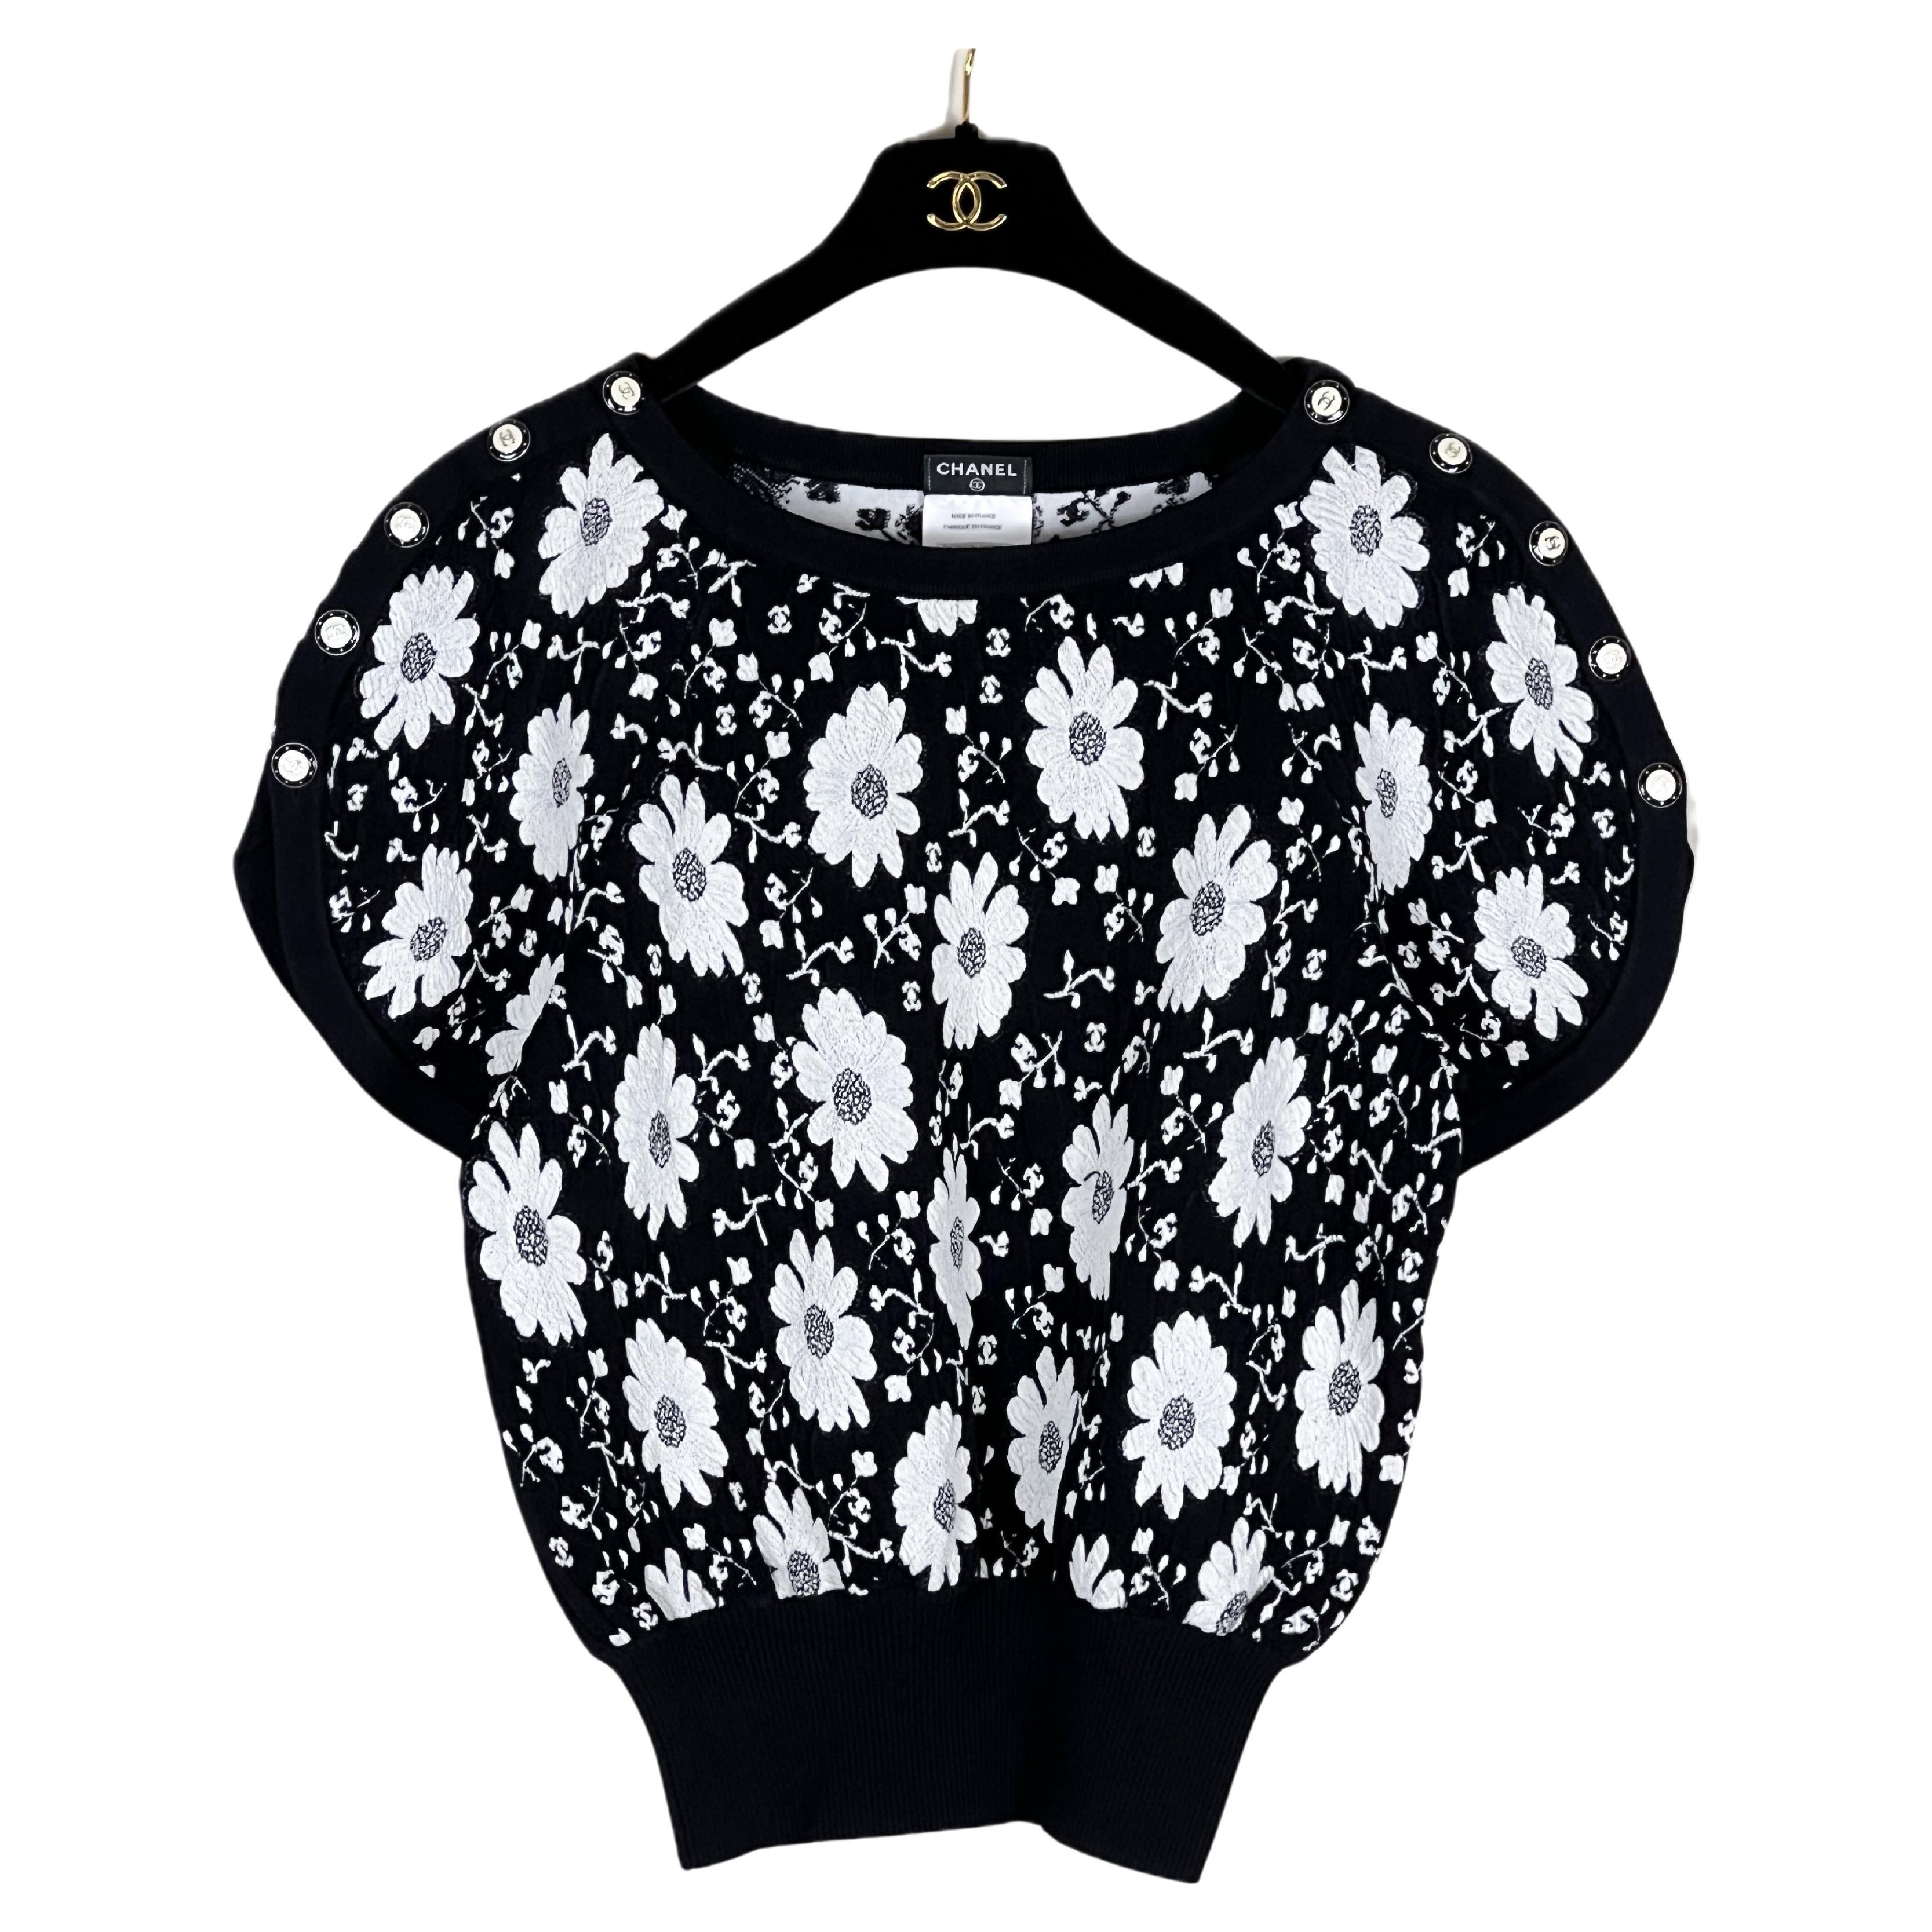 Chanel Iconic Katy Perry Style CC Logos Camellias Top For Sale